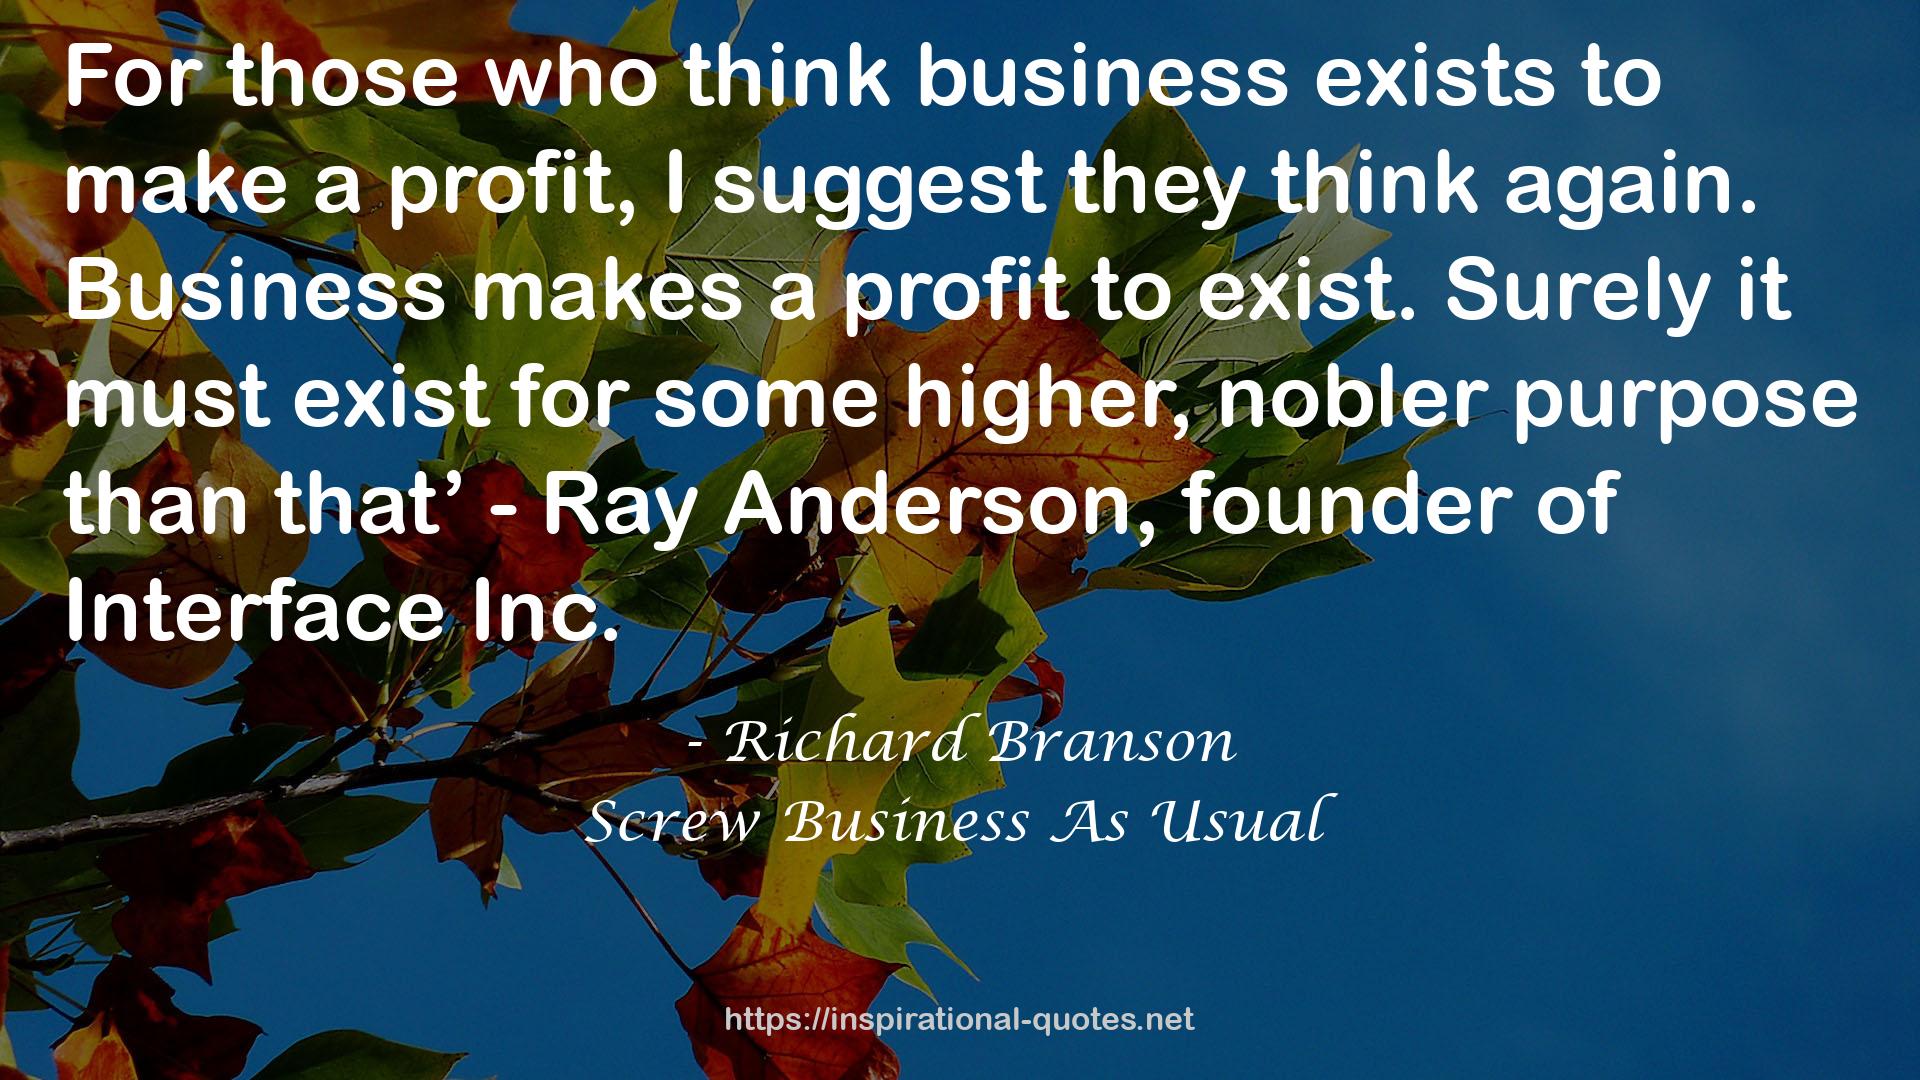 Screw Business As Usual QUOTES